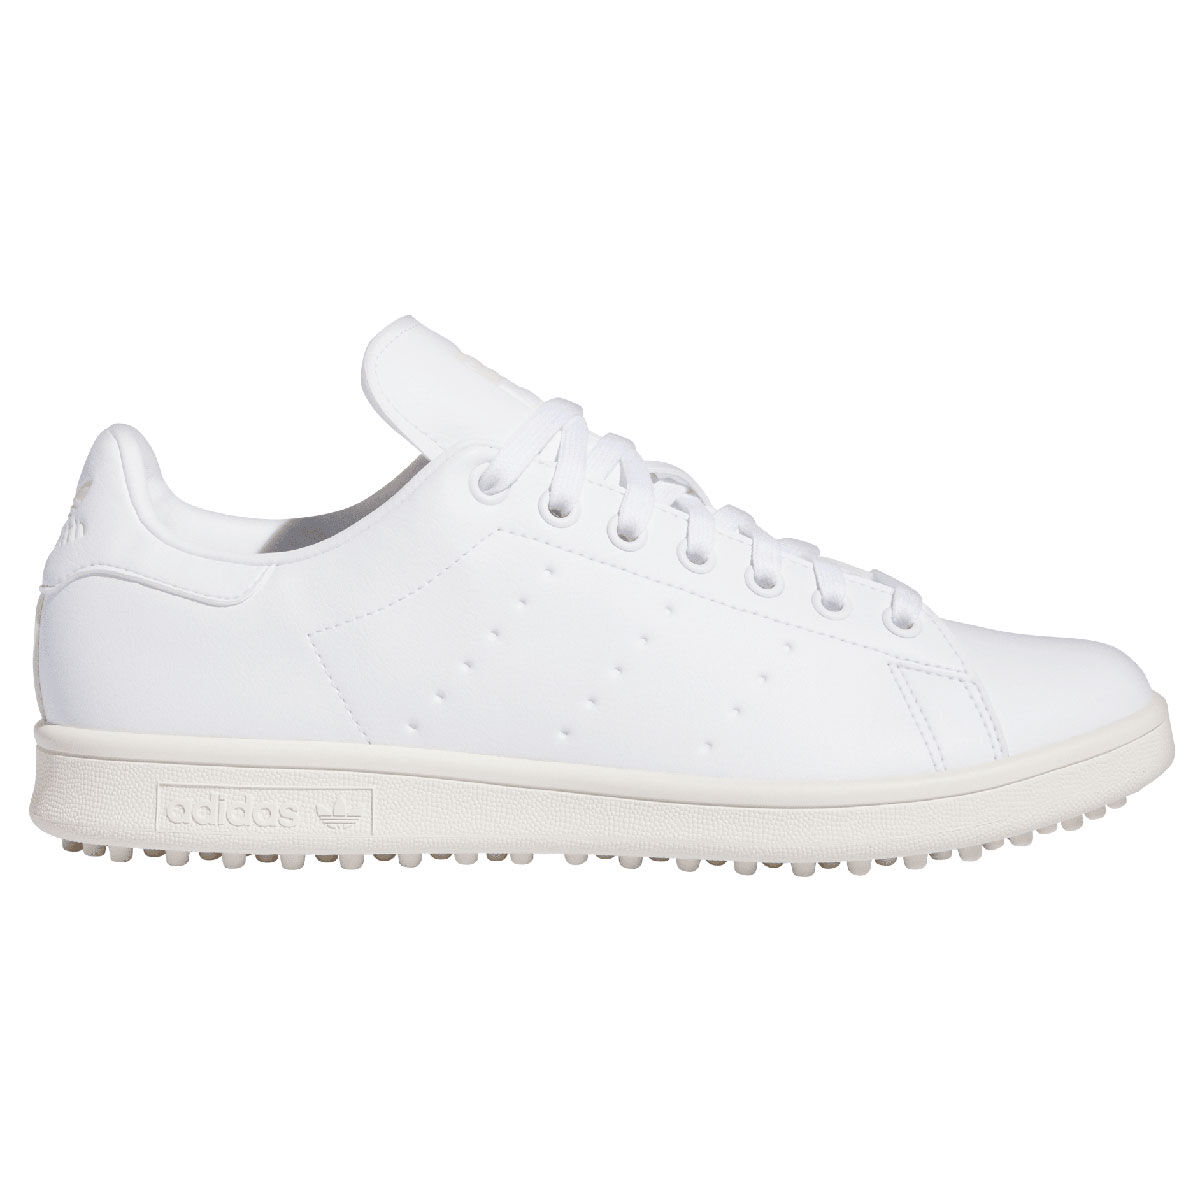 adidas Men’s Stan Smith Waterproof Spikeless Golf Shoes, Mens, White/off white/white, 8 | American Golf